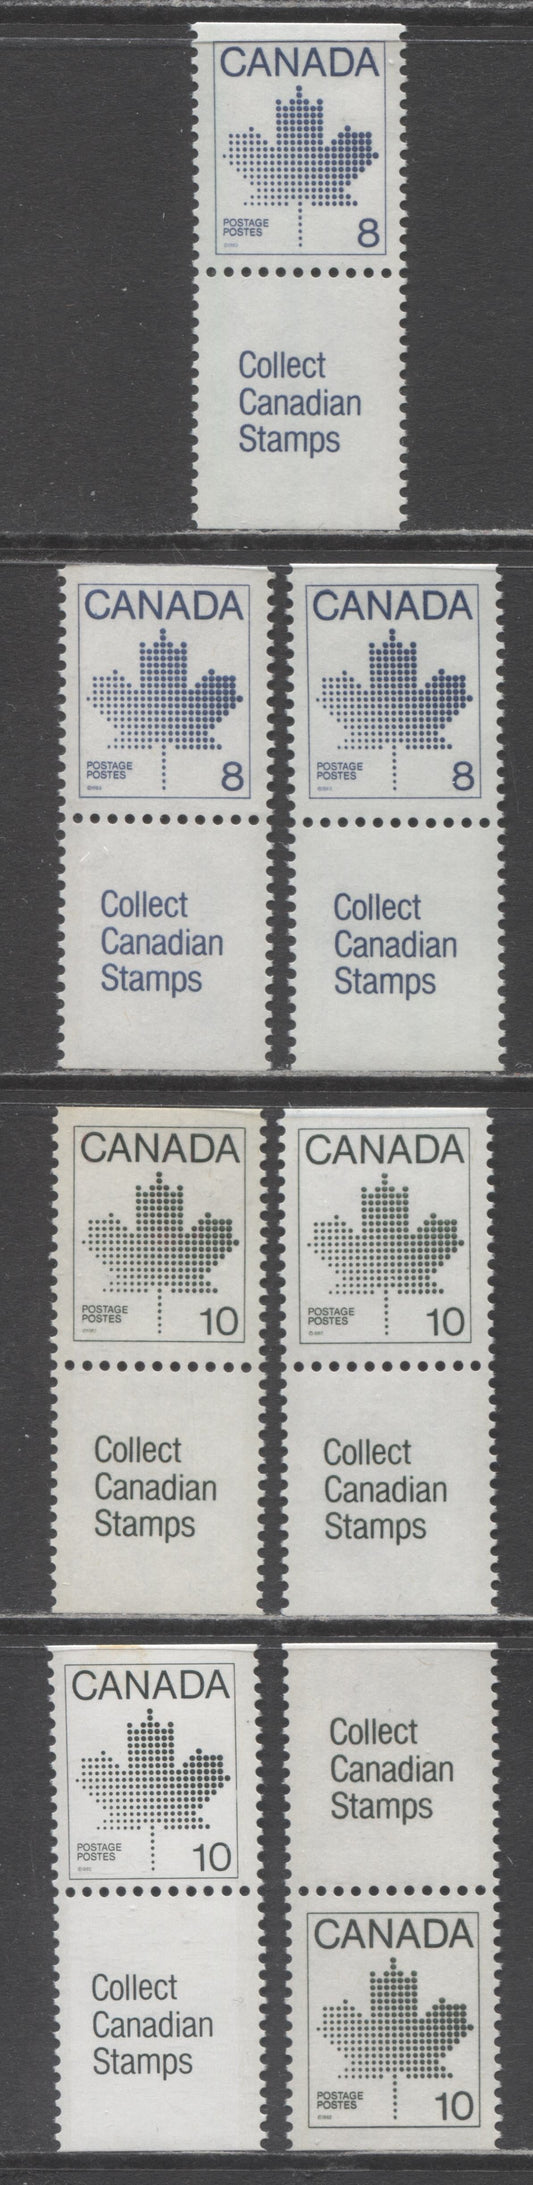 Lot 367 Canada #943, 944,i 8c & 10c Dark Blue & Dark Green Maple Leaf, 1982-1987 Booklet Issue, 6 VFNH Se-tenant Booklet Stamp-Label Pairs On DF/DF, LF/LF & LF-fl Coated & Uncoated Papers